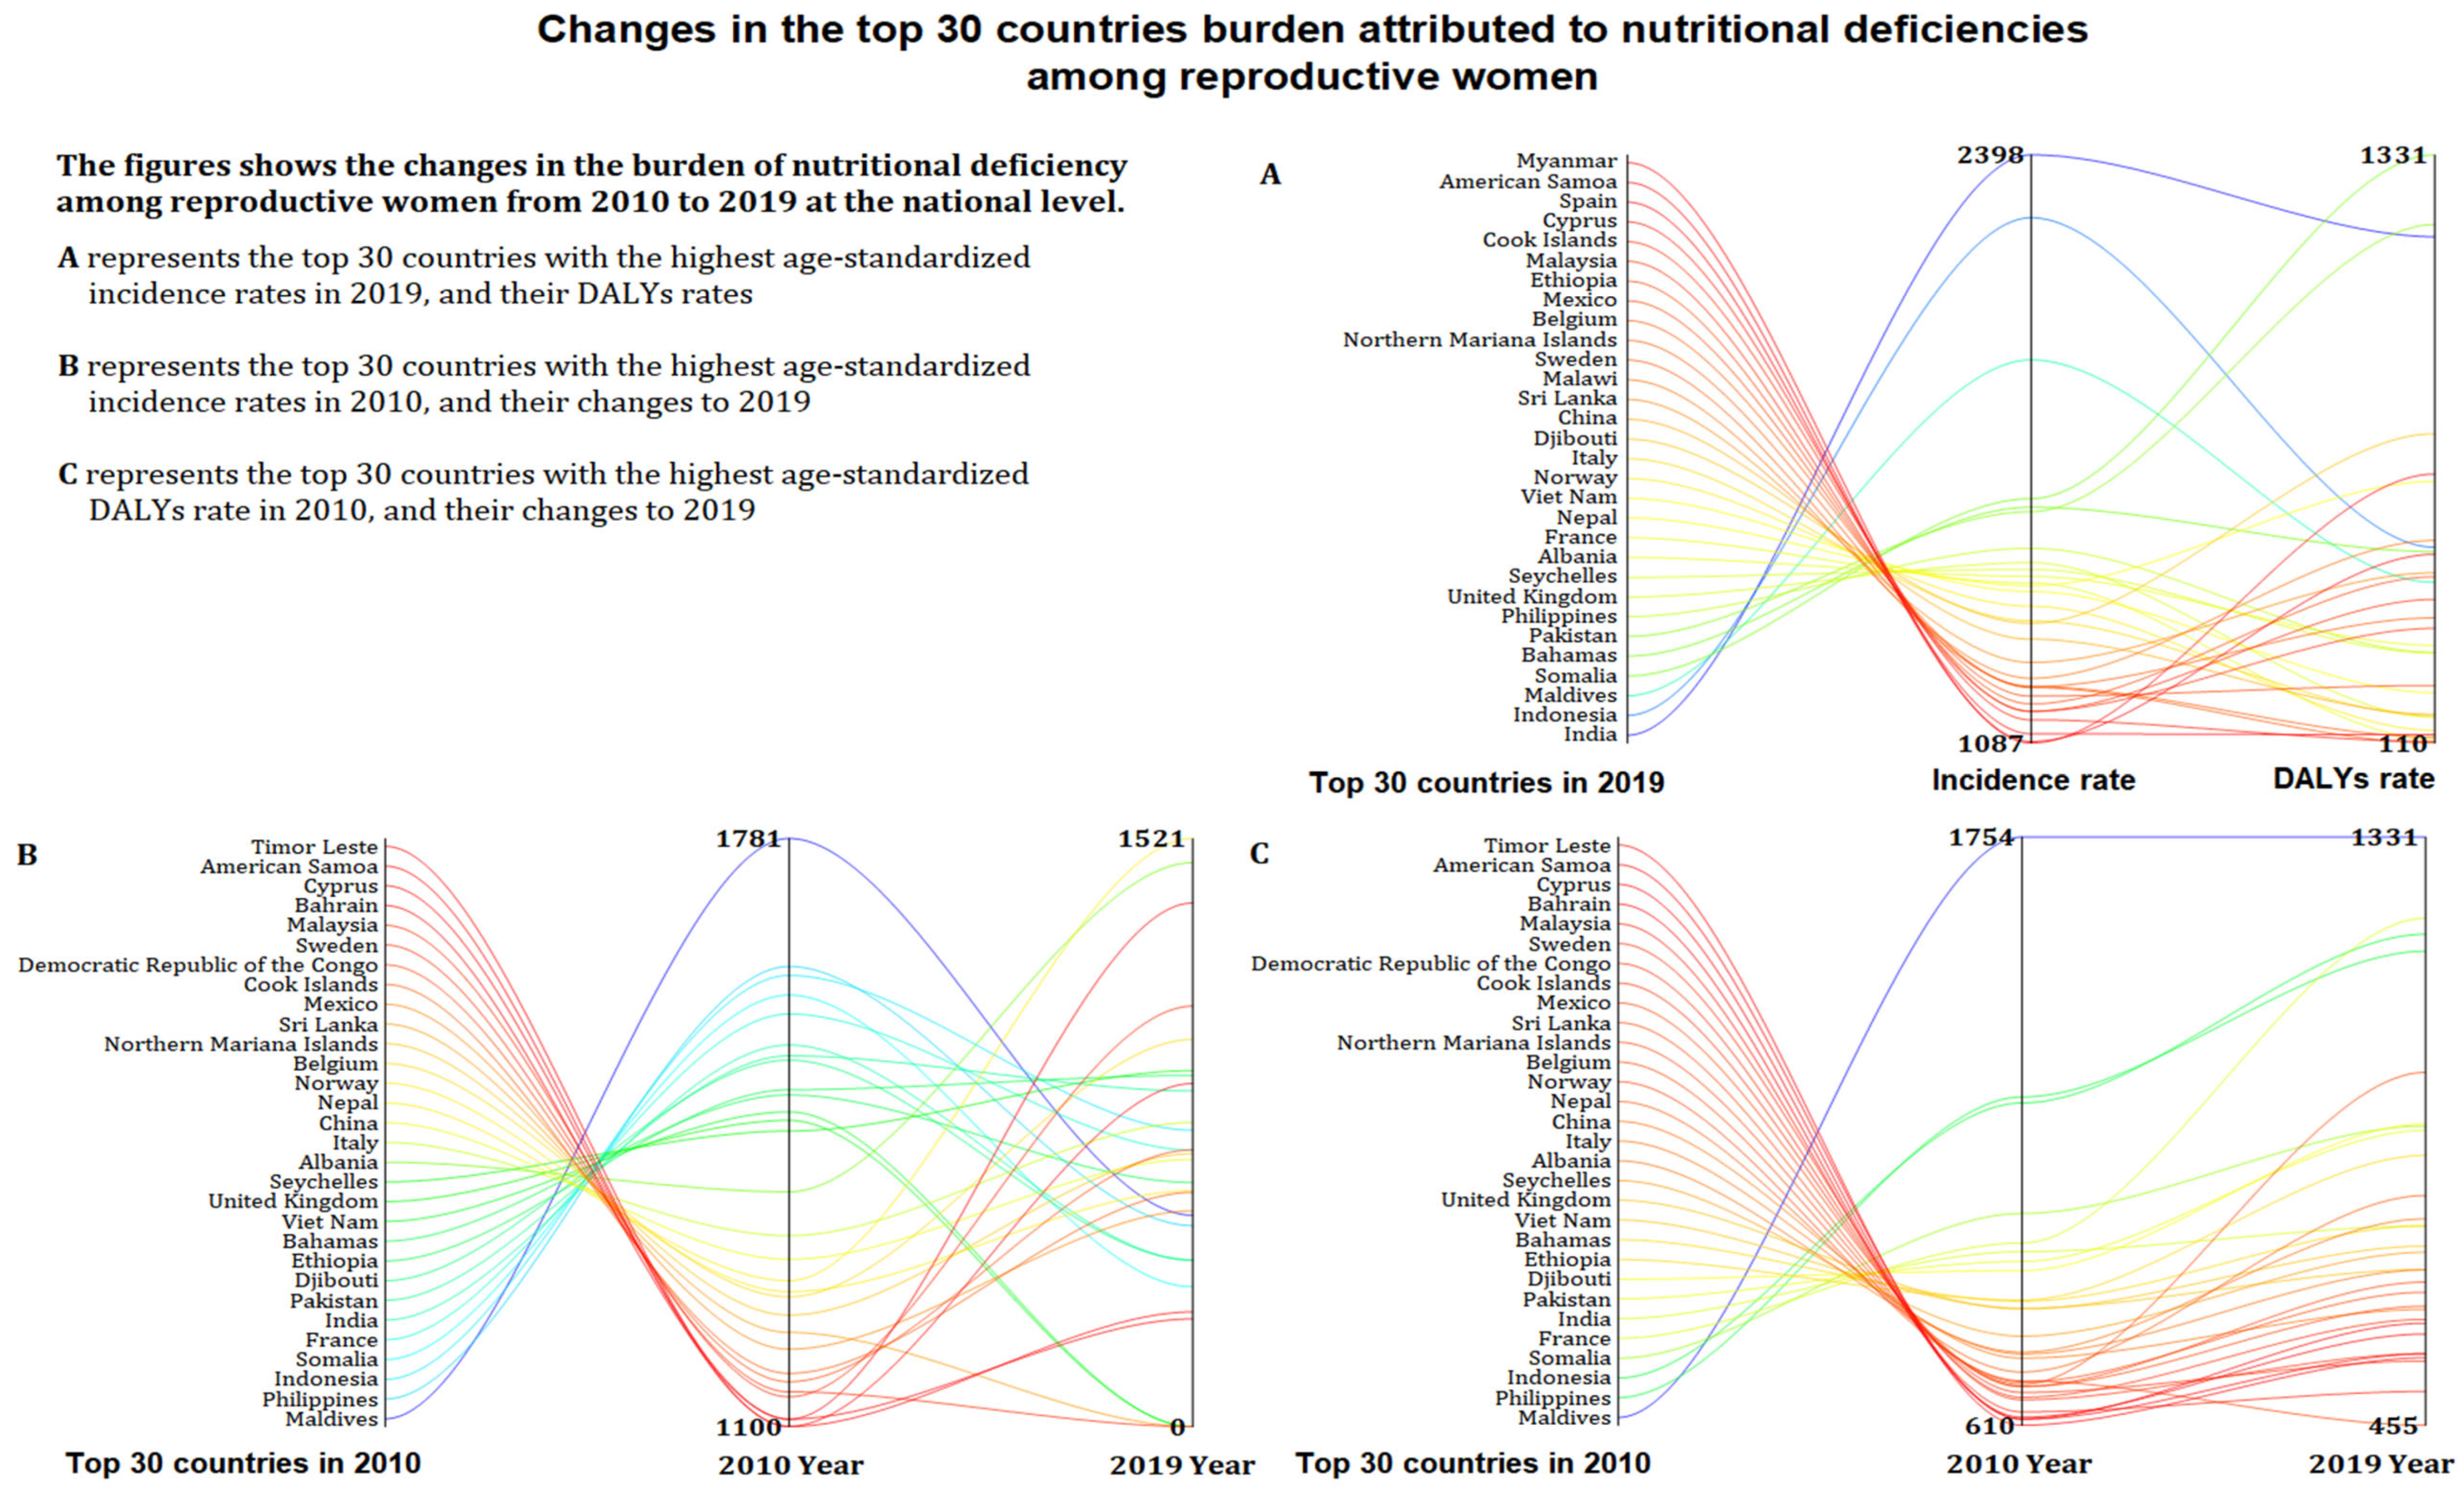 Nutrients Free Full-Text Global, Regional, and National Estimates of Nutritional Deficiency Burden among Reproductive Women from 2010 to 2019